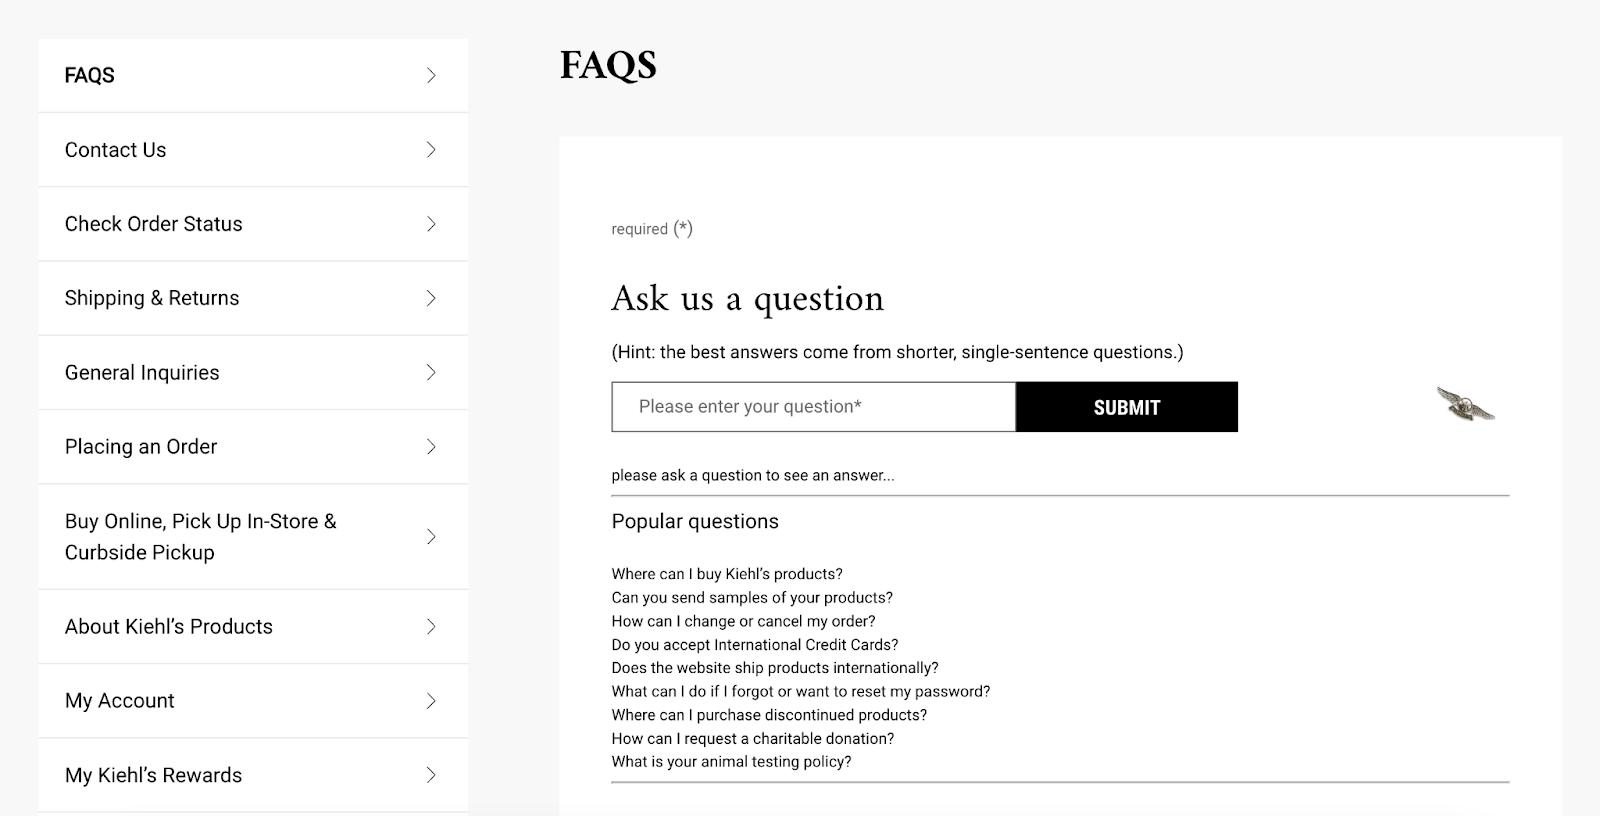 Kiehls has search bar and popular questions at the top of the faq page design